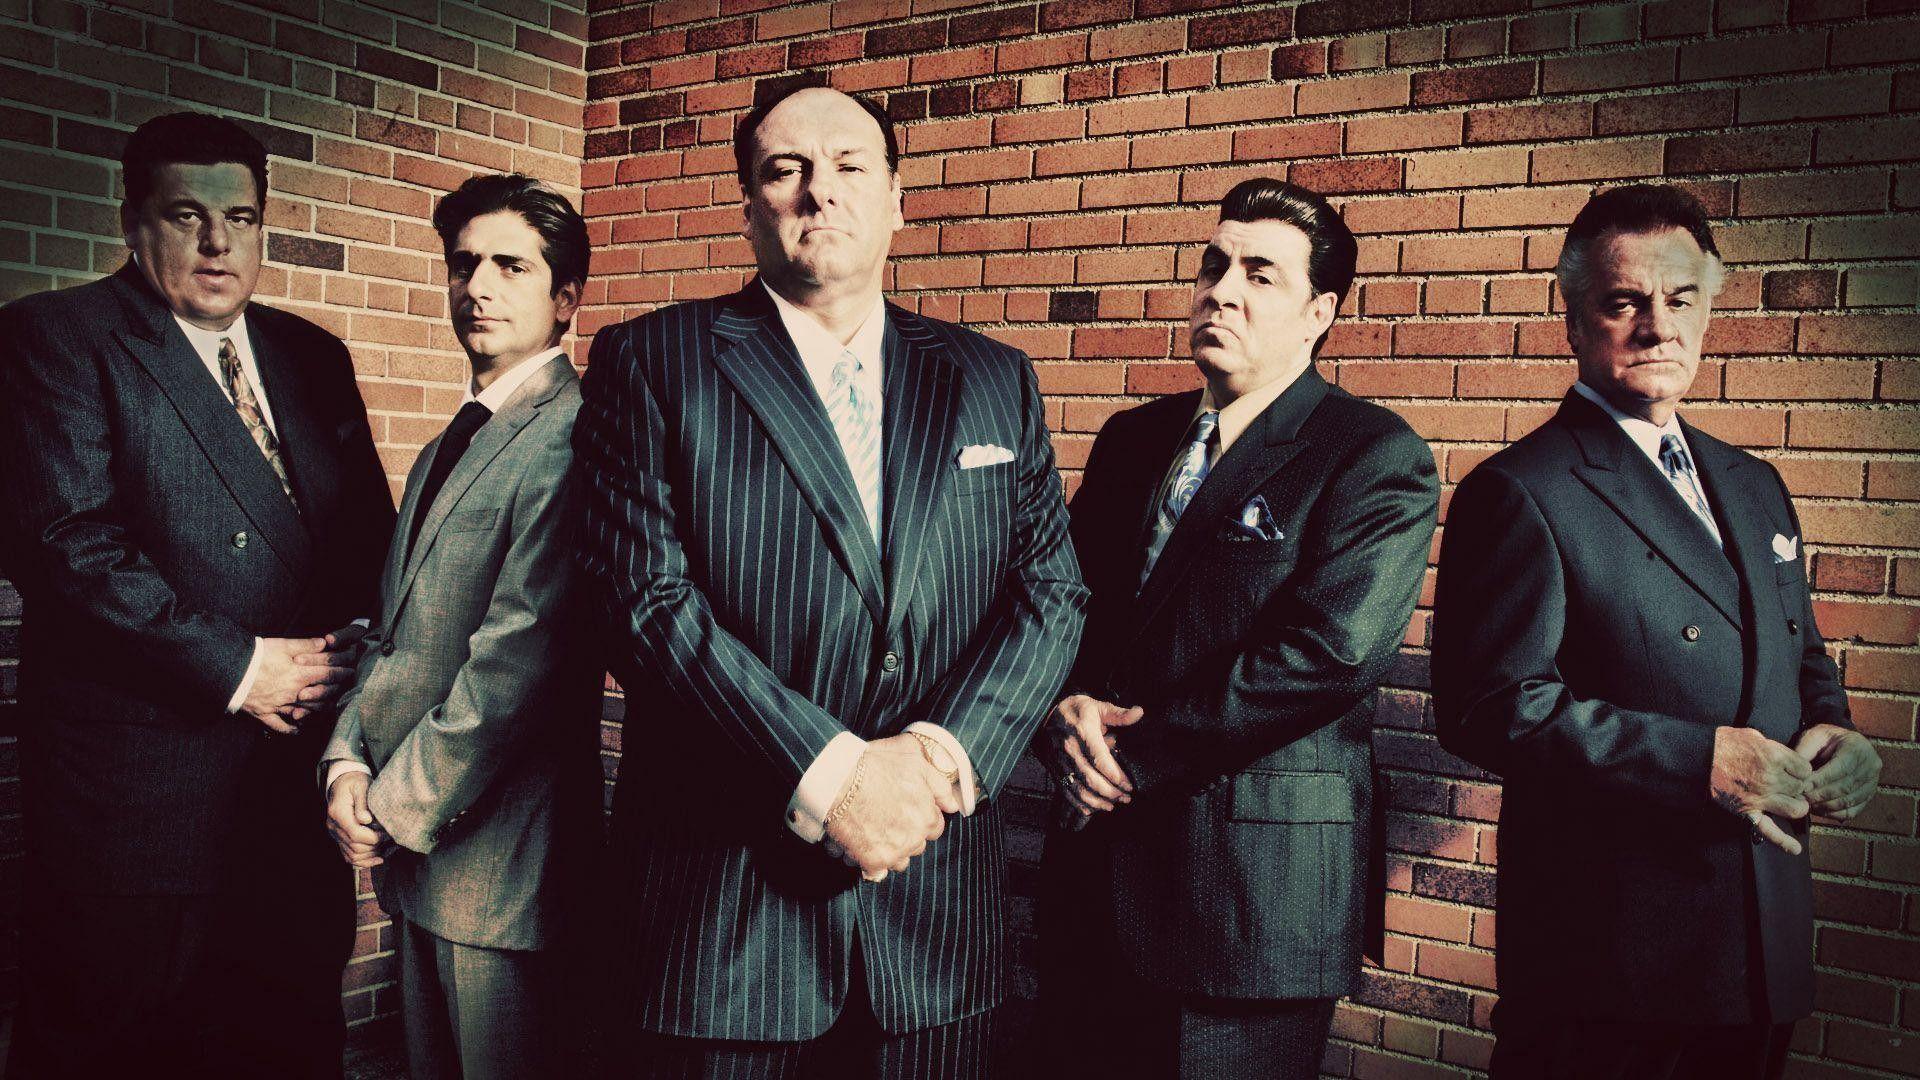 The Sopranos Wallpapers 29 images inside